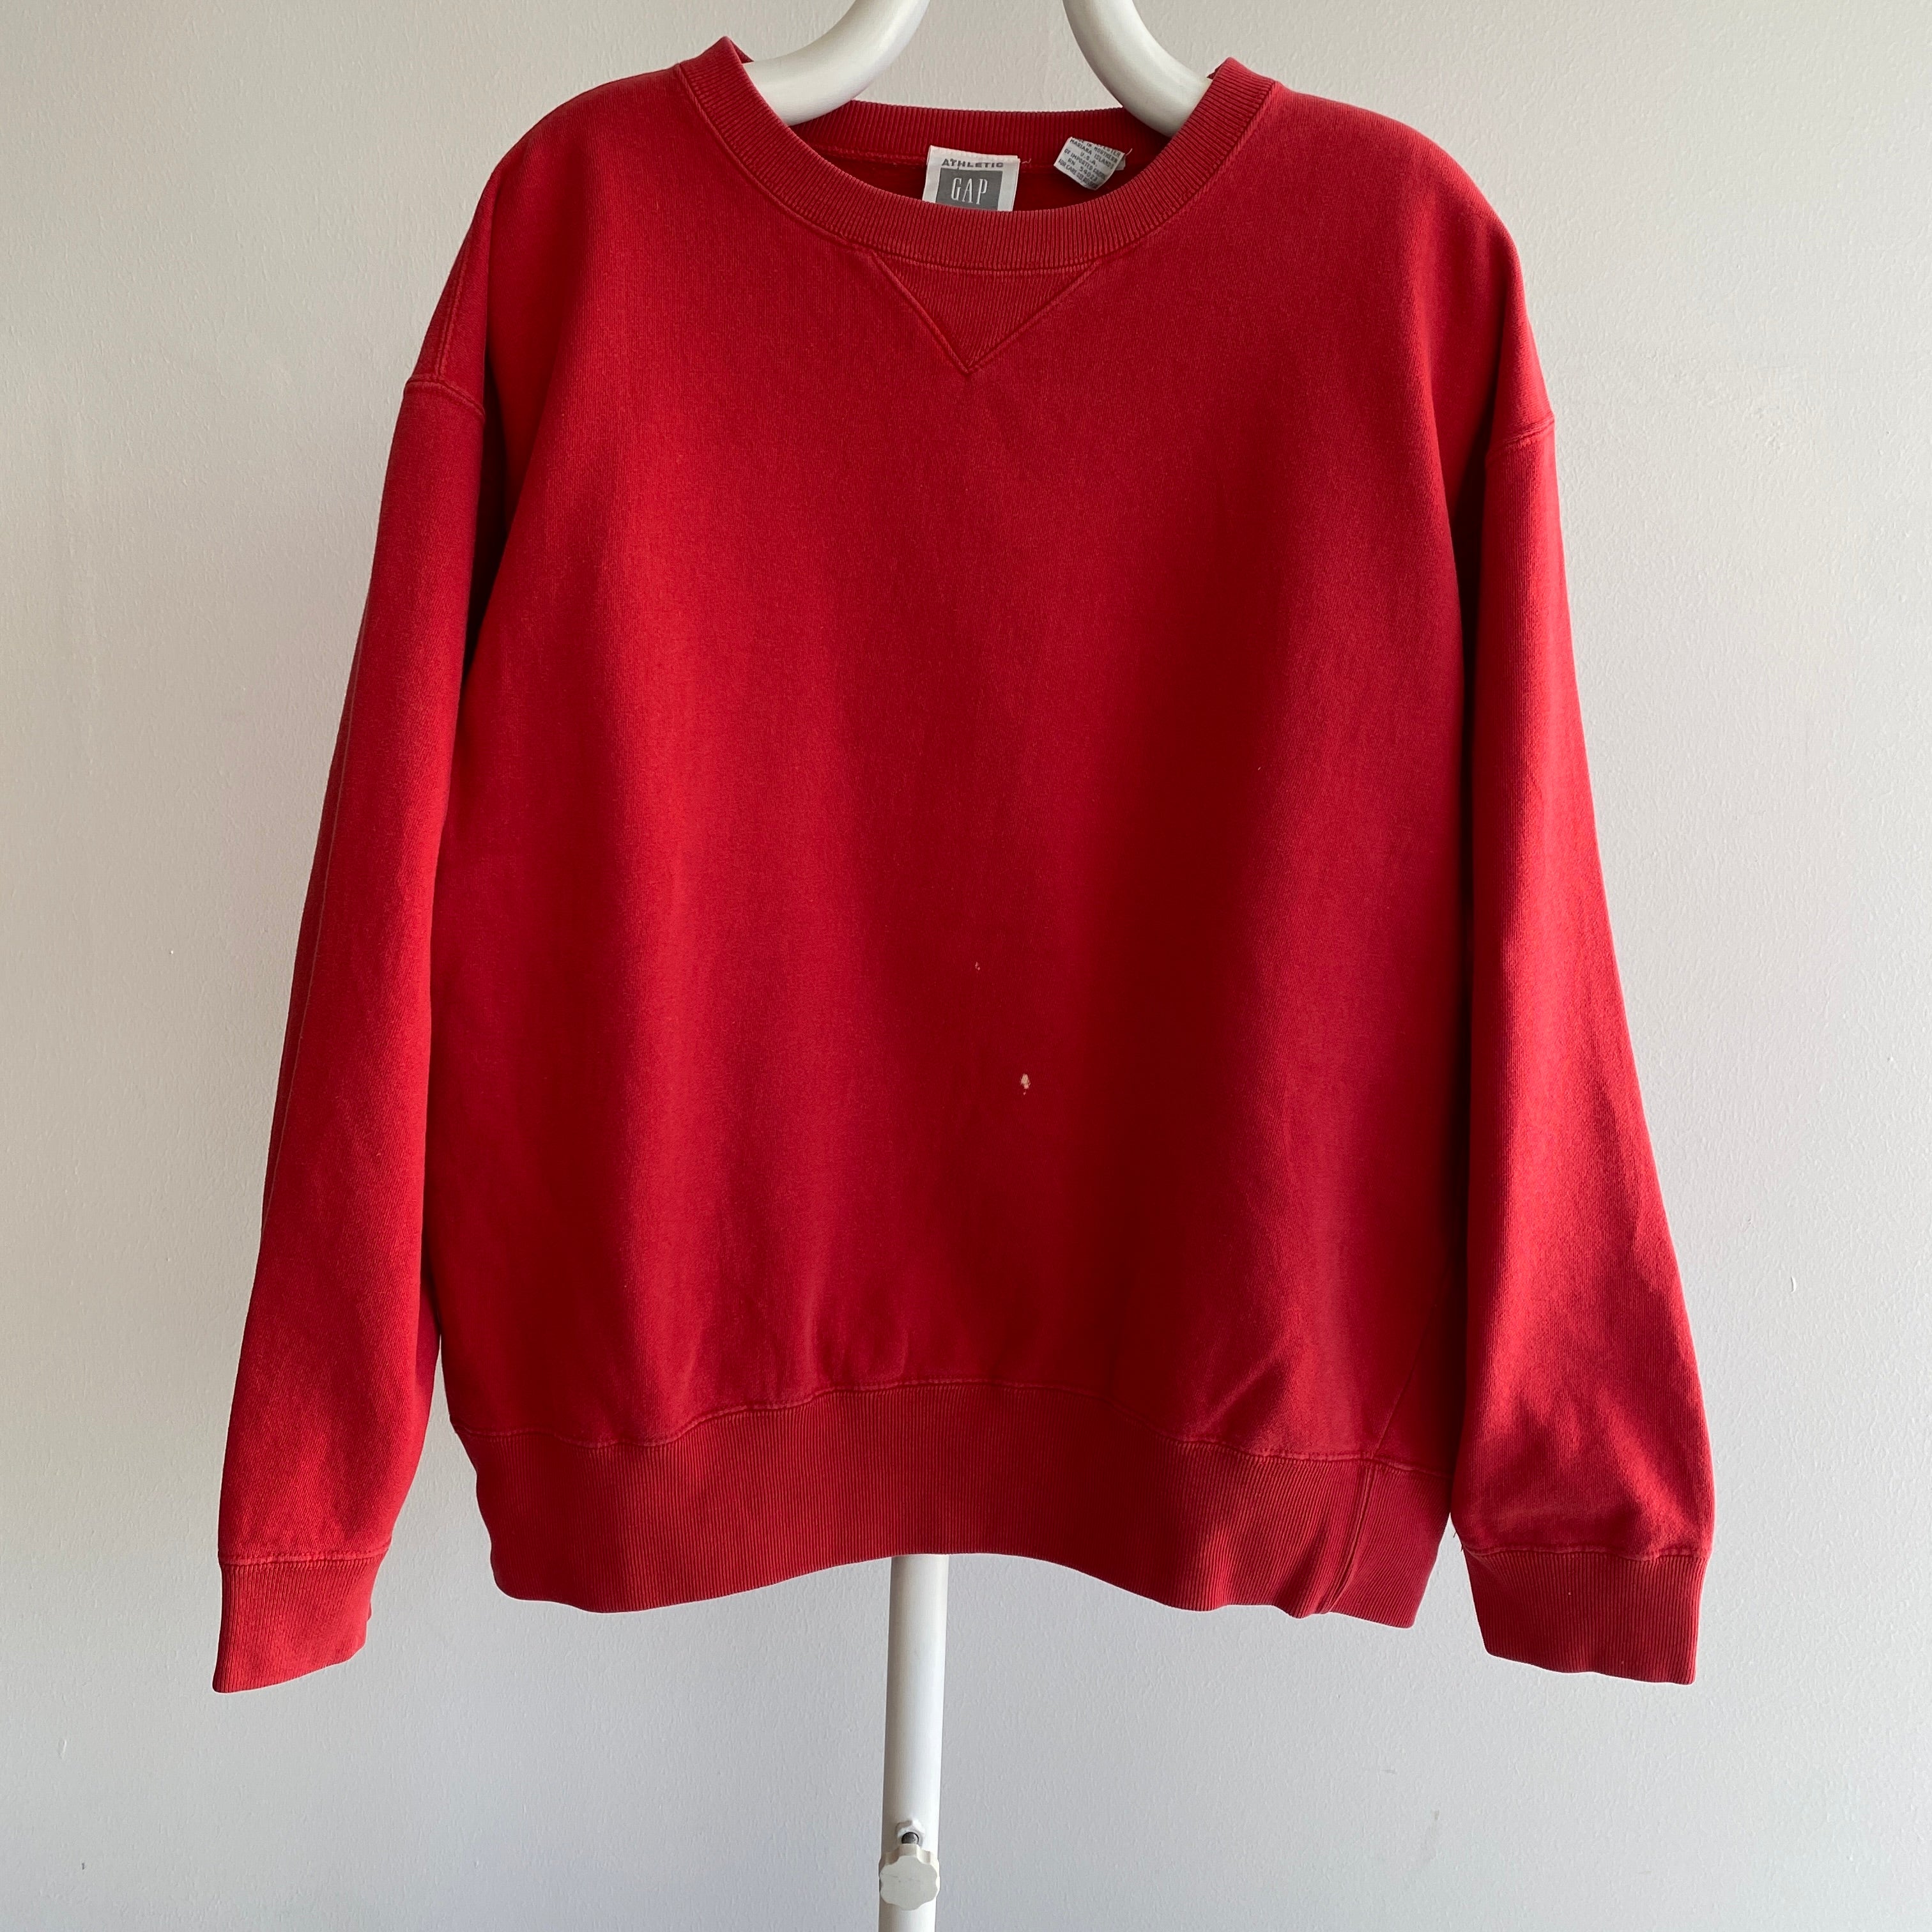 1990s Blank Red USA Made Gap Sweatshirt with a Single Bleach Stain